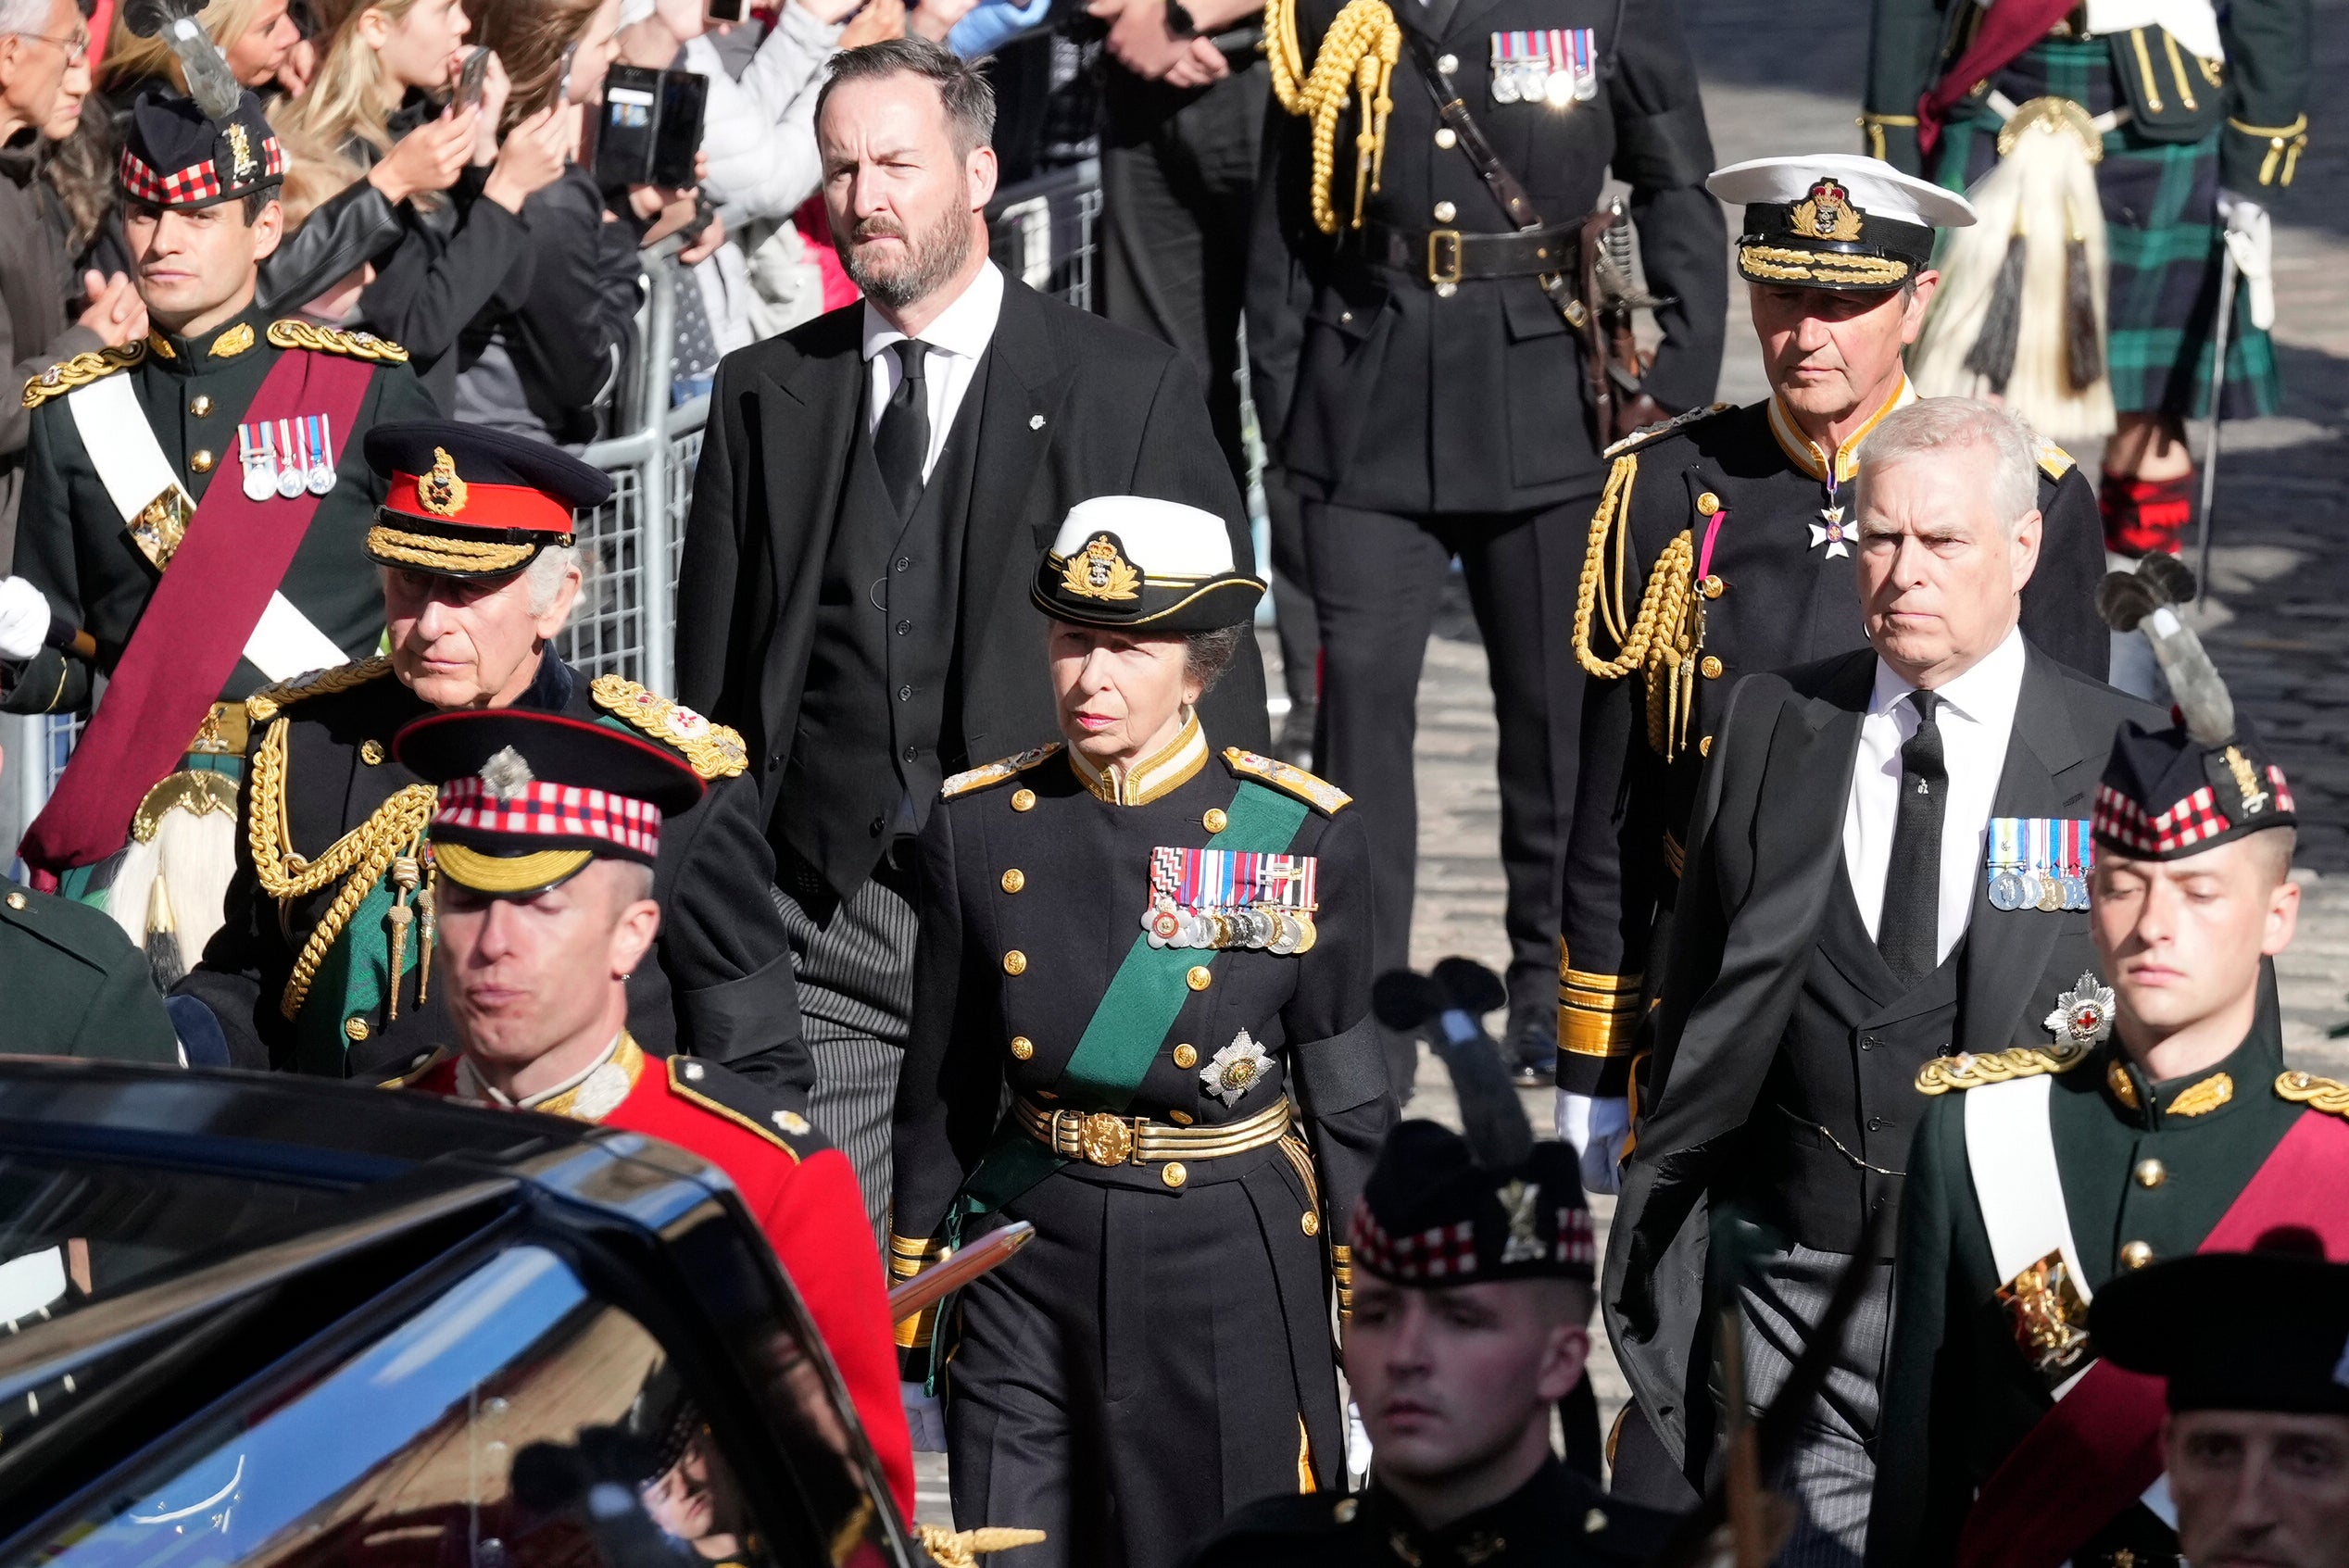 King Charles III, Princess Anne, Prince Andrew, and Vice Admiral Timothy Laurence walk behind the hearse carrying Queen Elizabeth II’s coffin on Monday